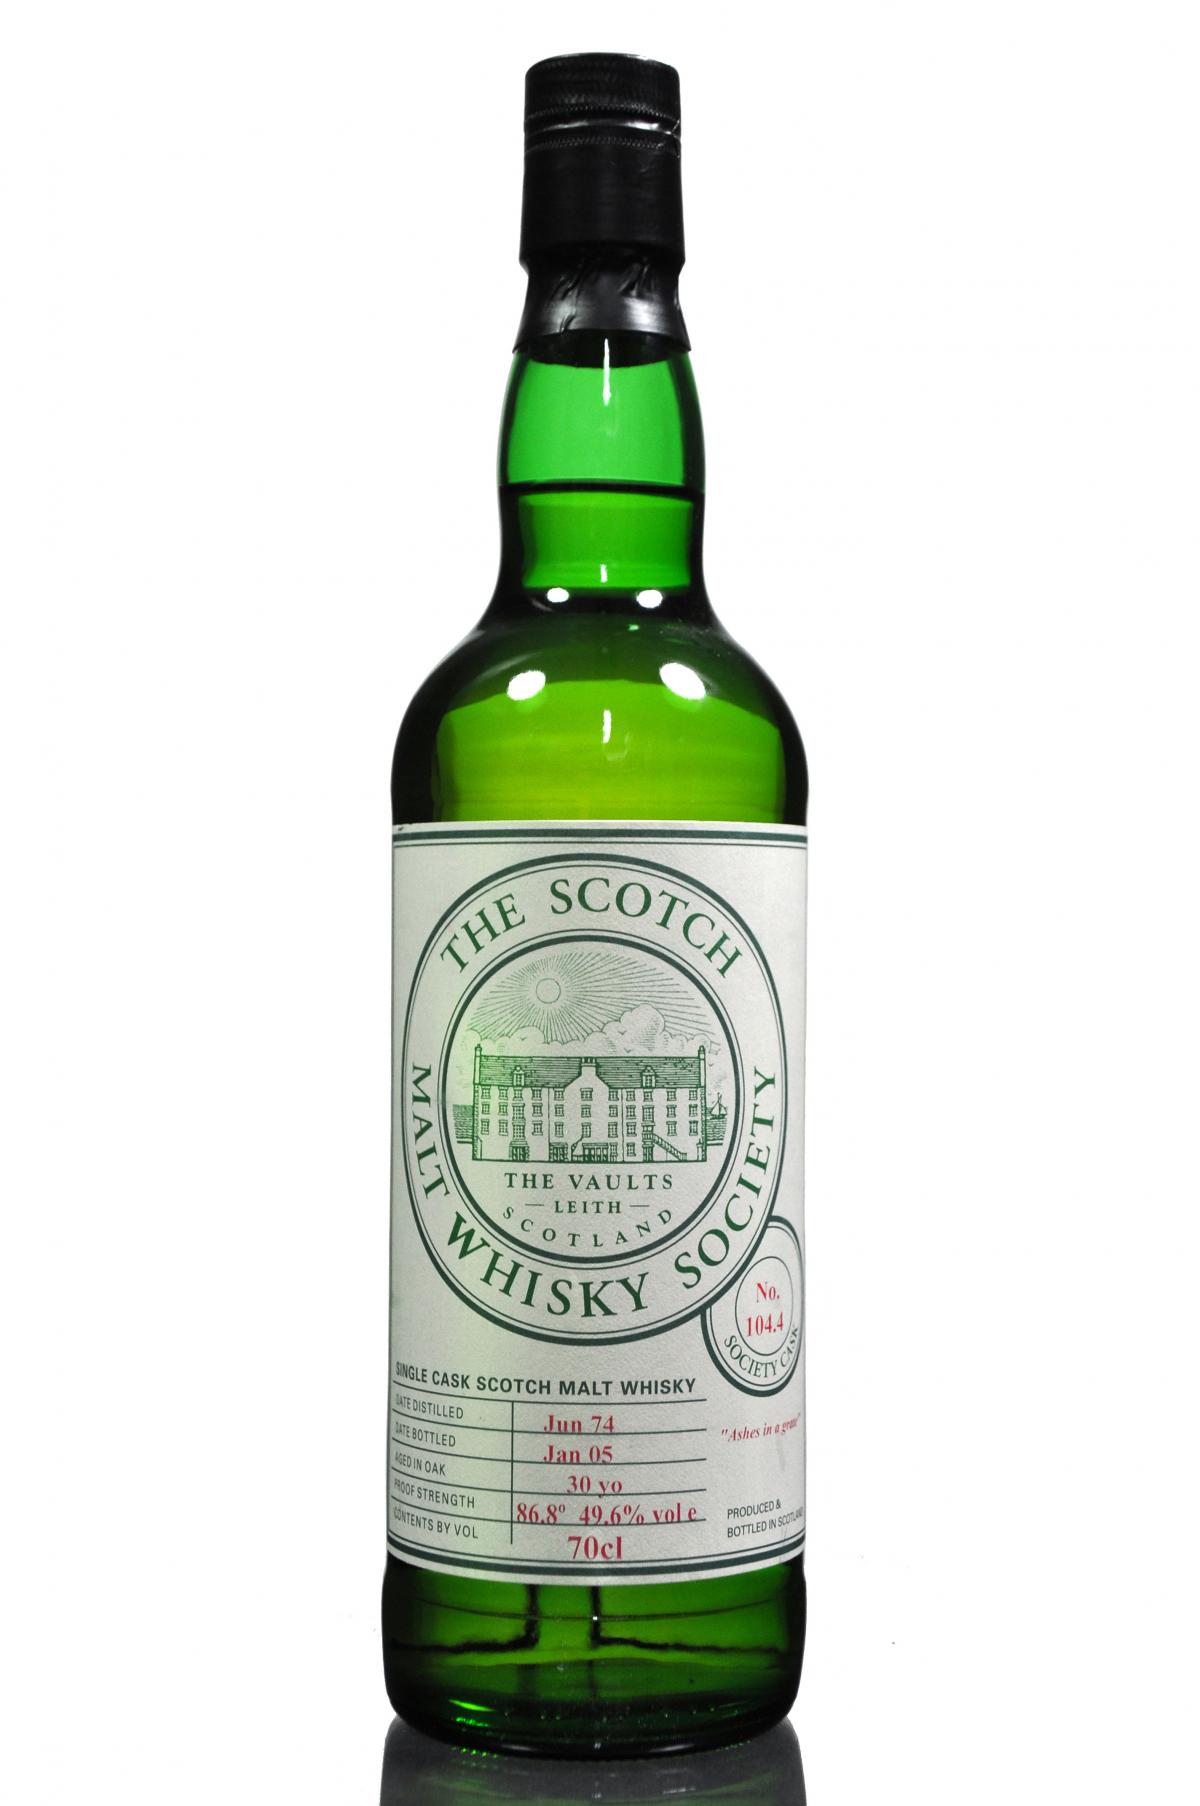 Glencraig 1974-2005 - 30 Year Old - SMWS 104.4 - Ashes In A Grate